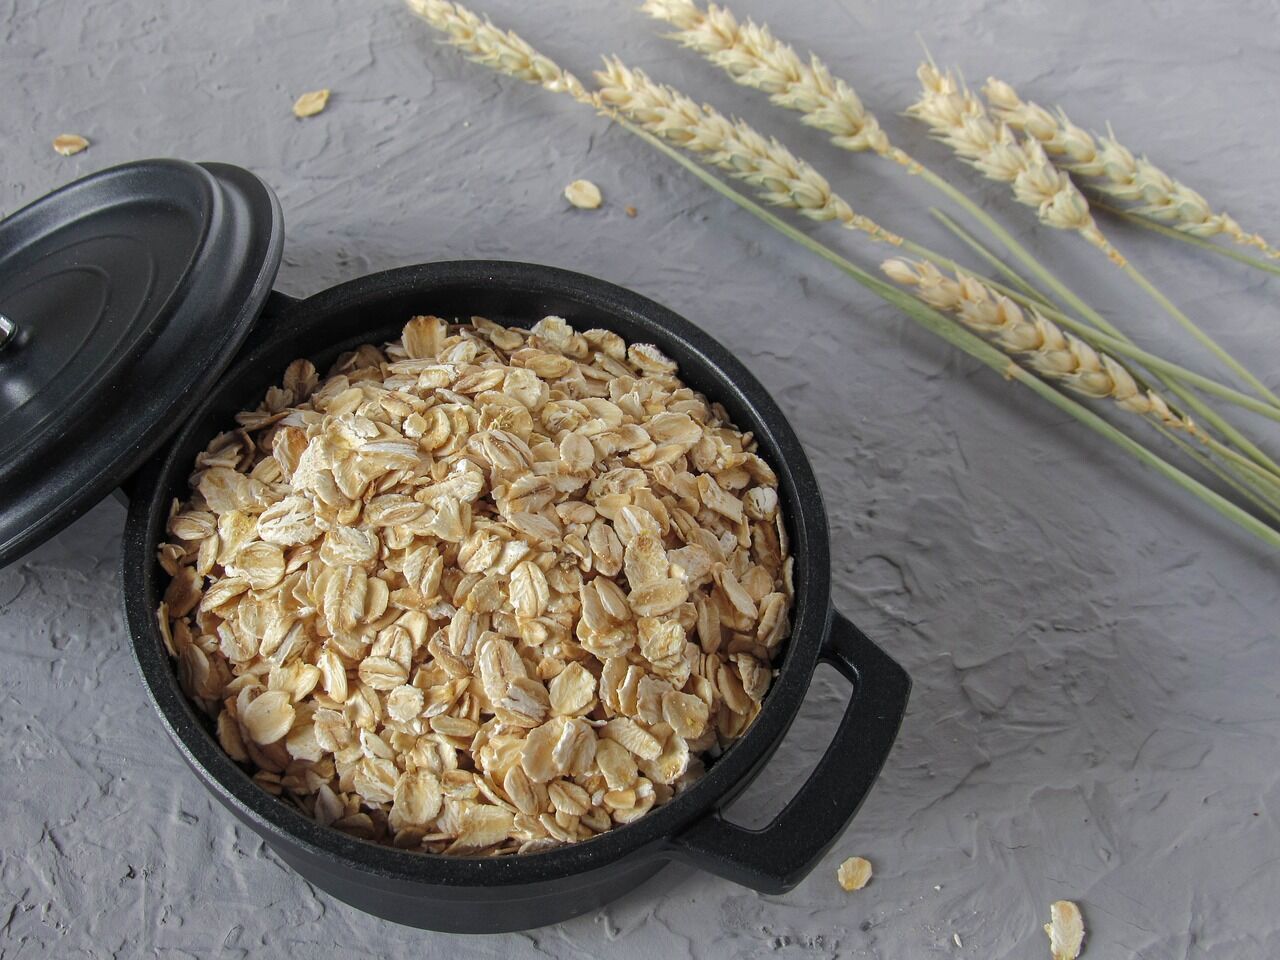 Why oatmeal shouldn't be eaten every day and how it's harmful